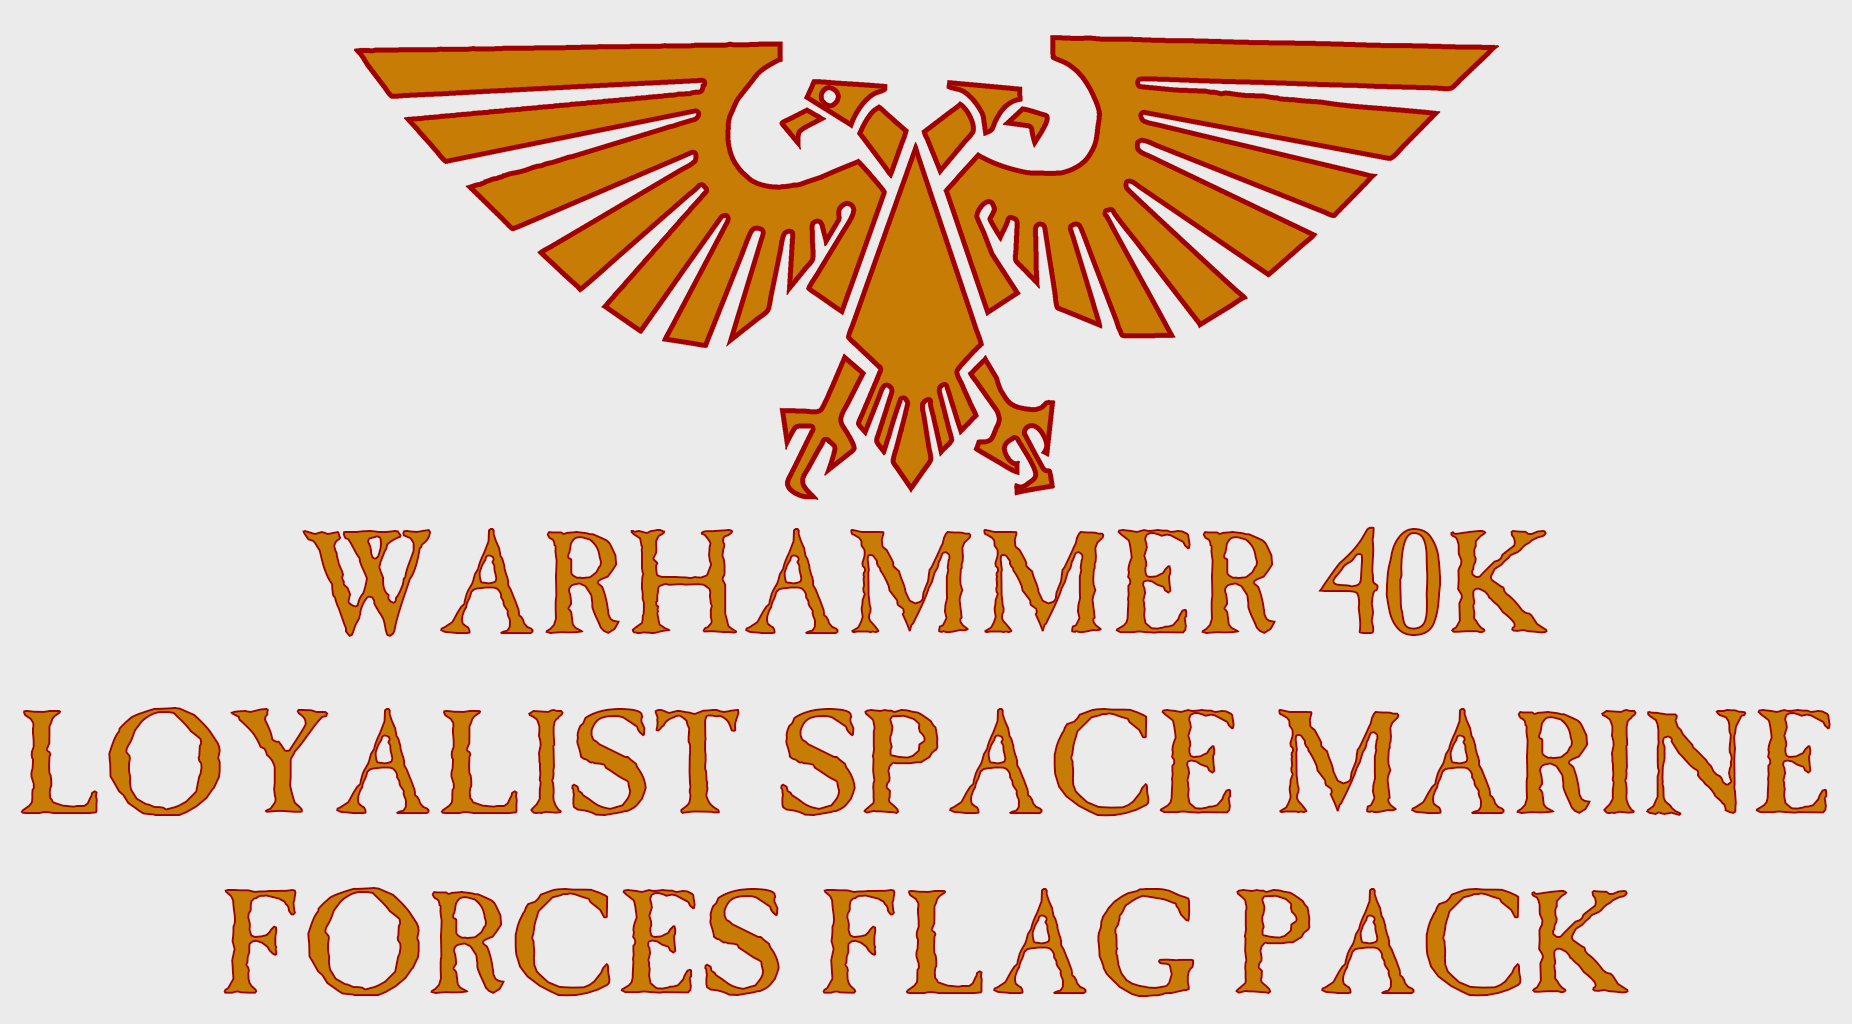 hearts of iron 4 space marines